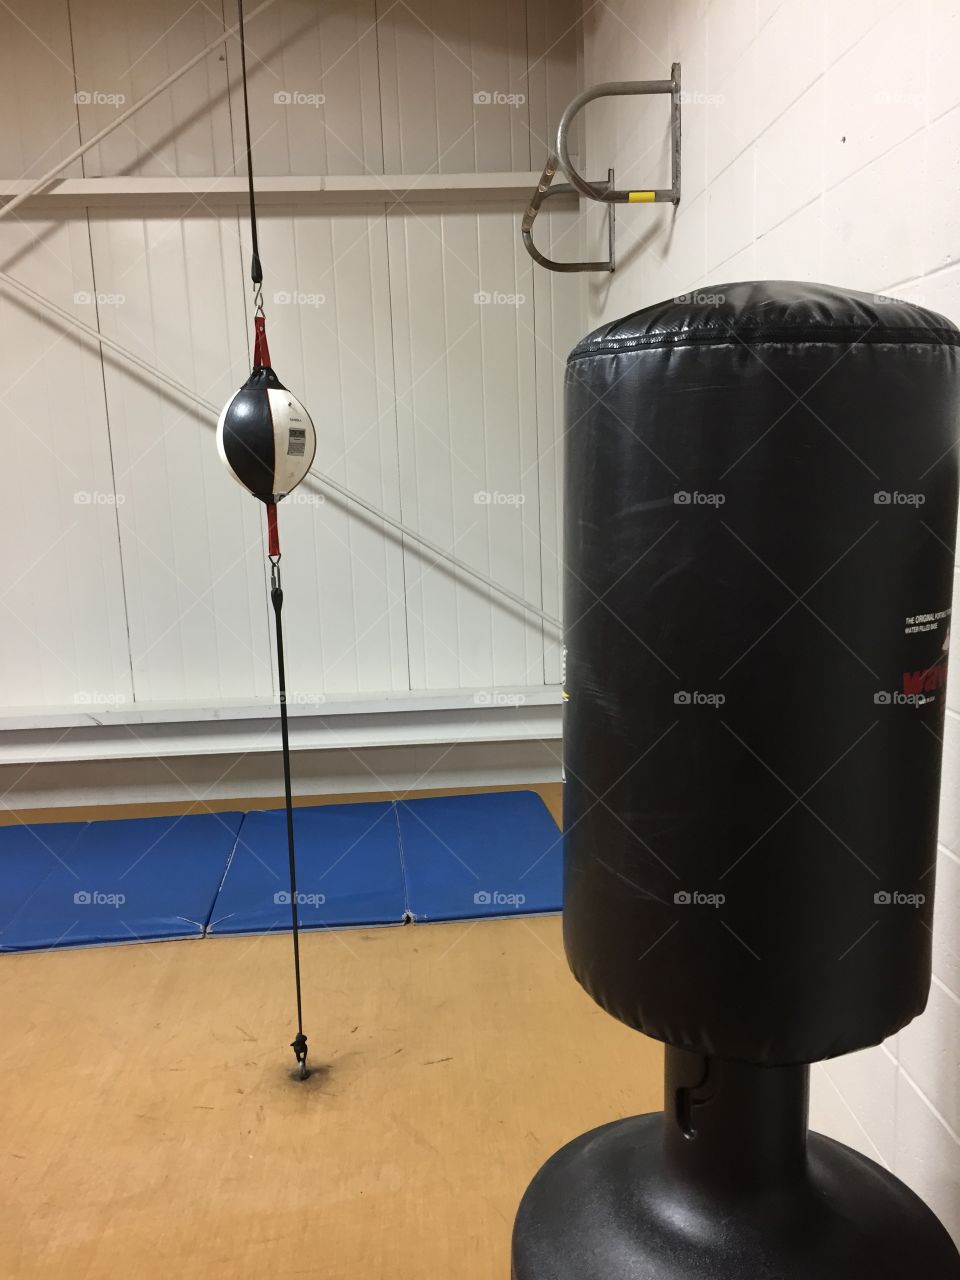 At the boxing gym 